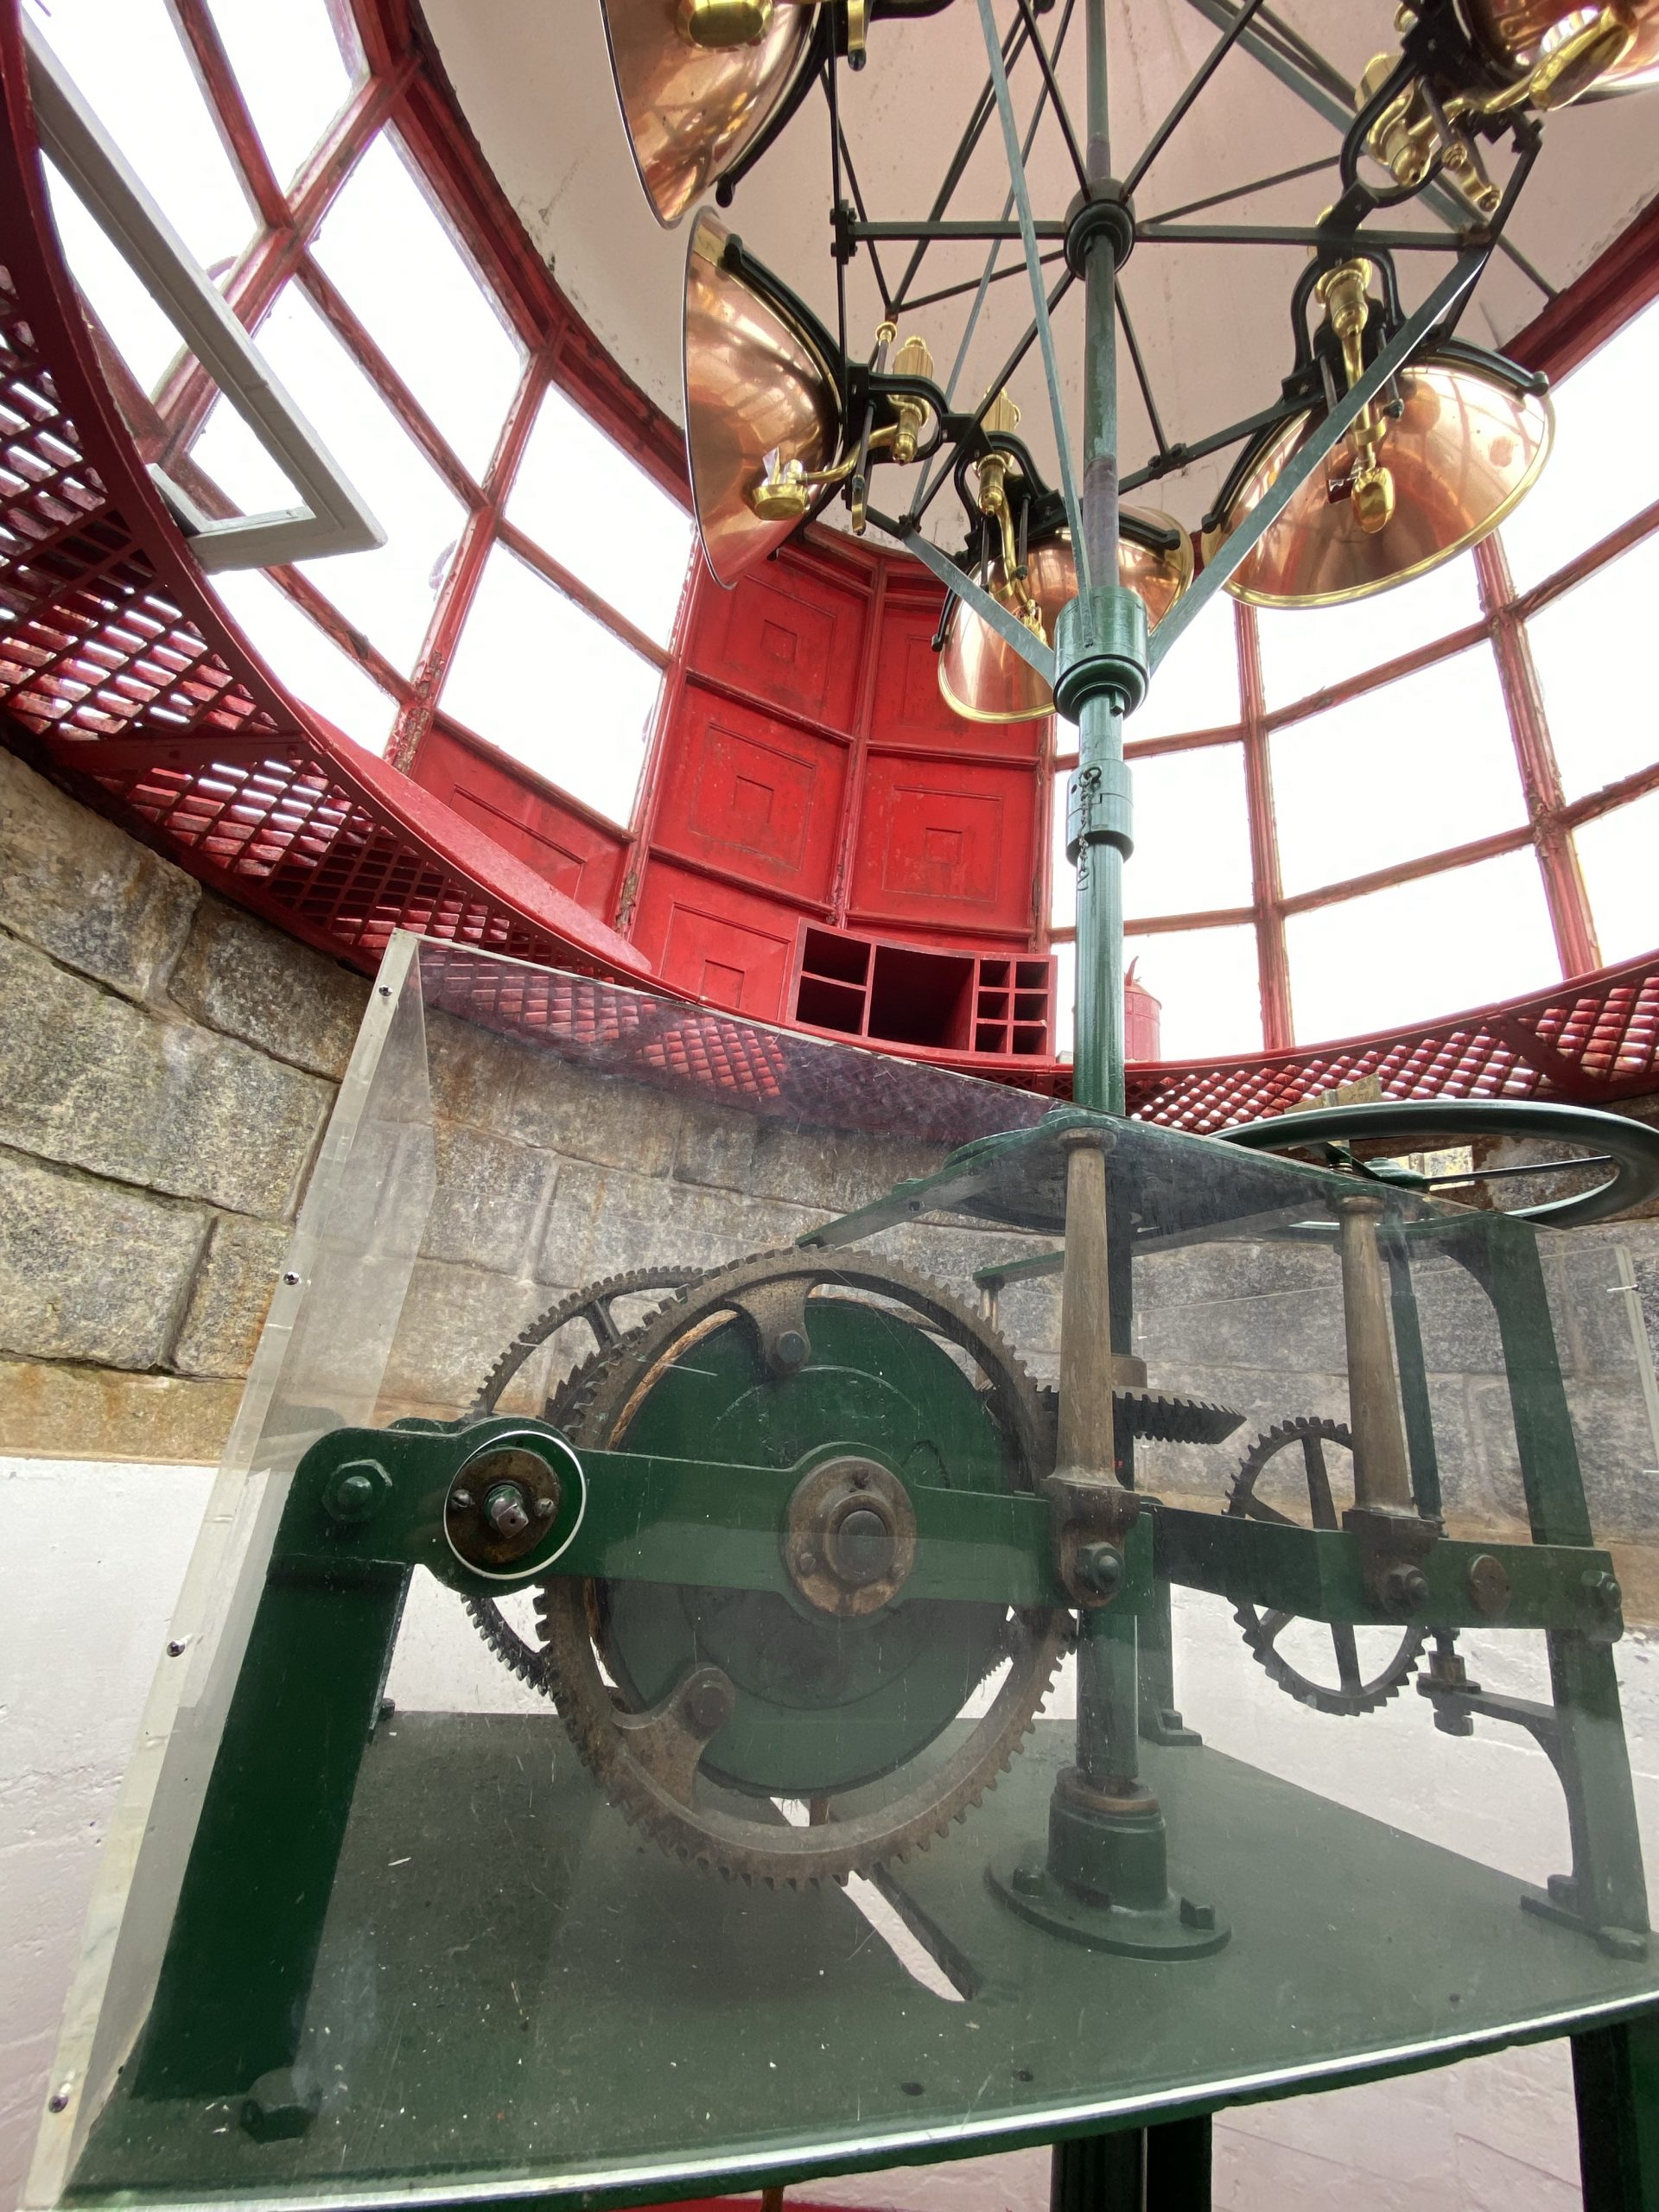 The mechanical counterweight mechanism that turned the lights at the Bonavista lighthouse in Newfoundland.